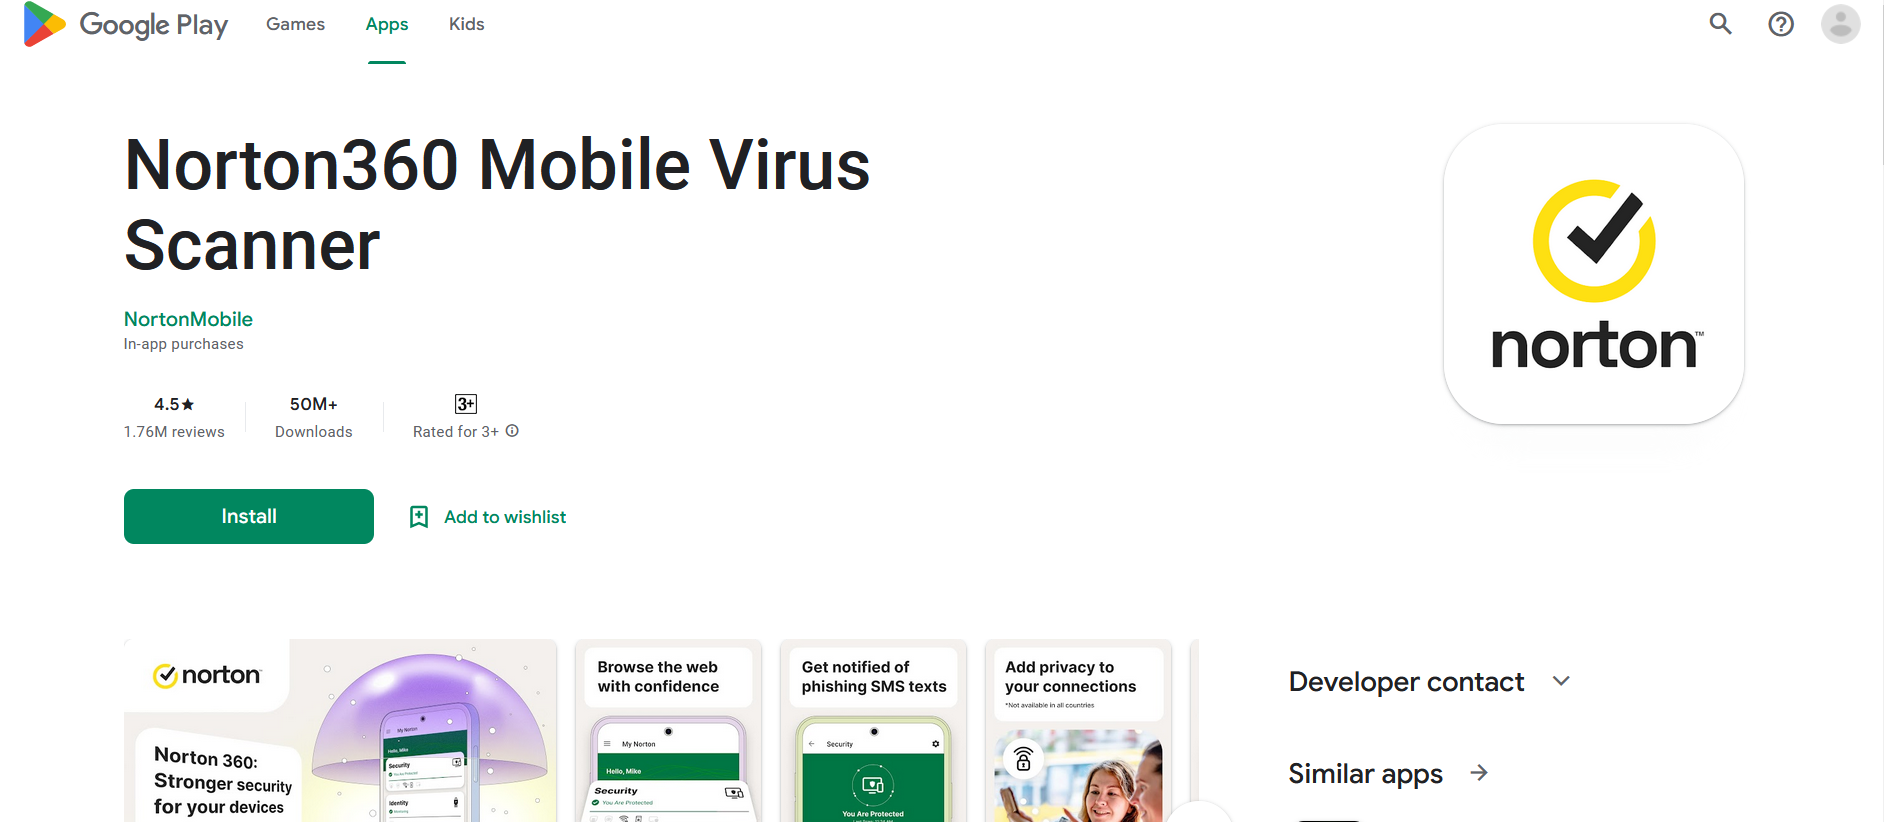 free antivirus for android users